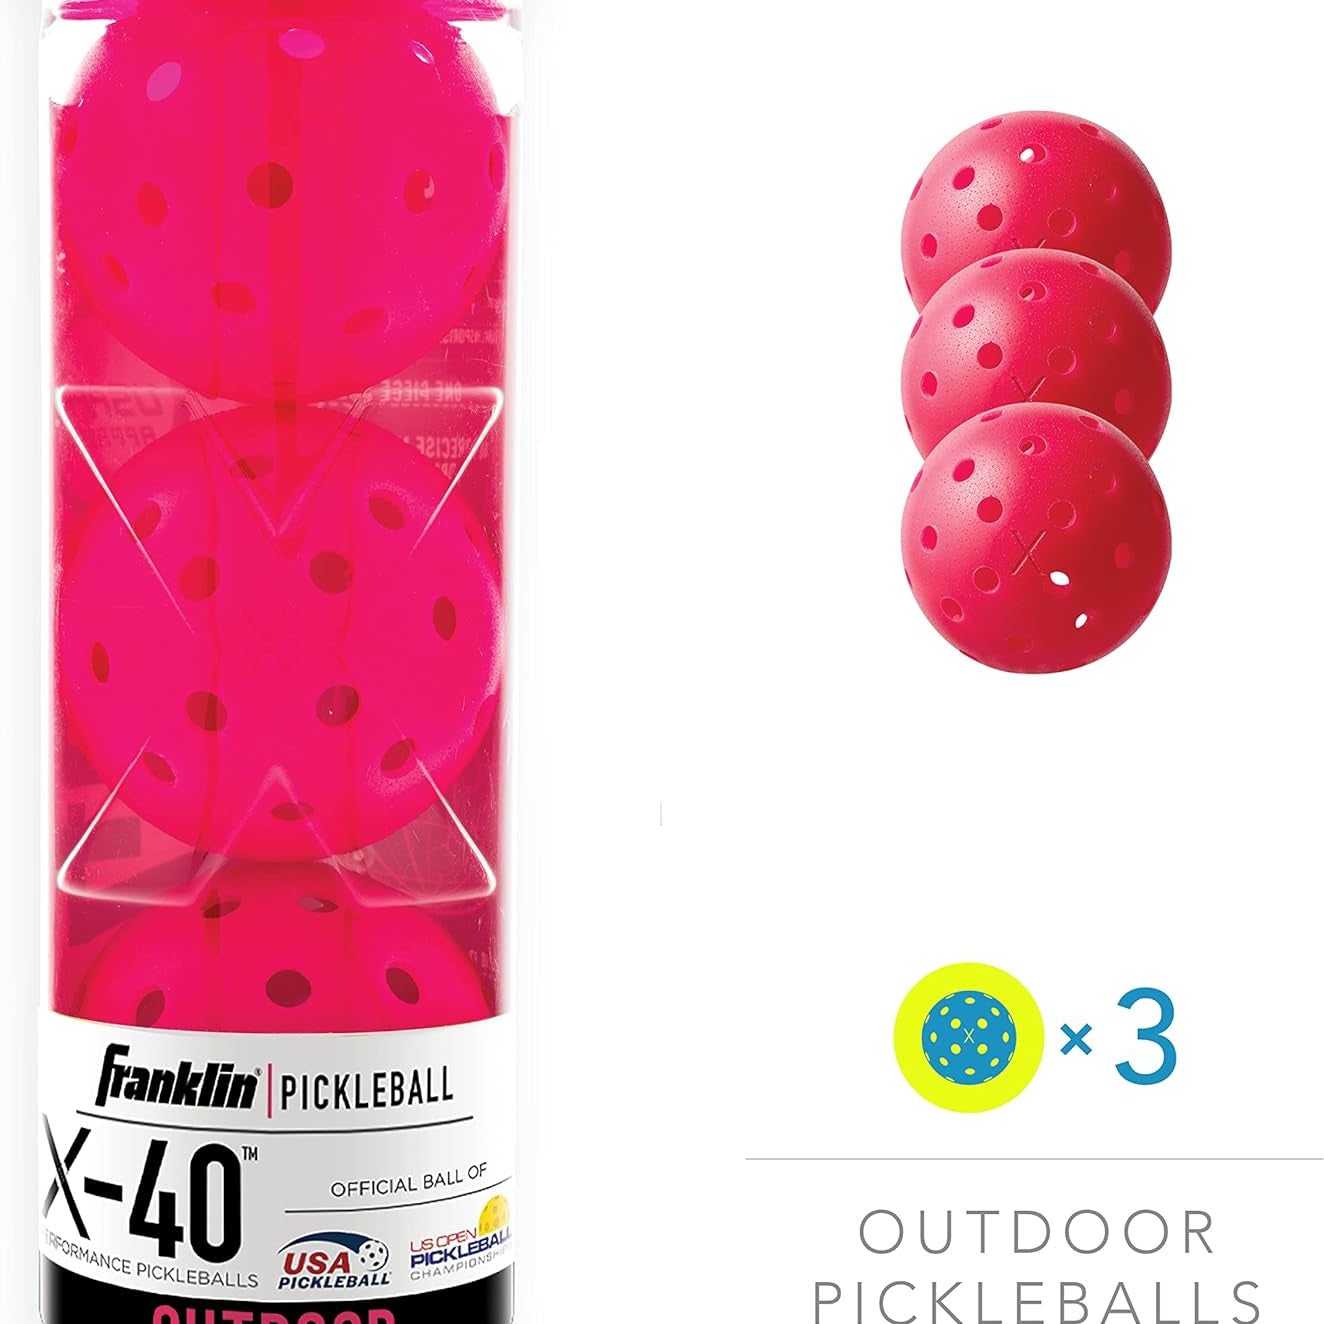 Franklin X-40 Pickleball balls in Red 3 pack